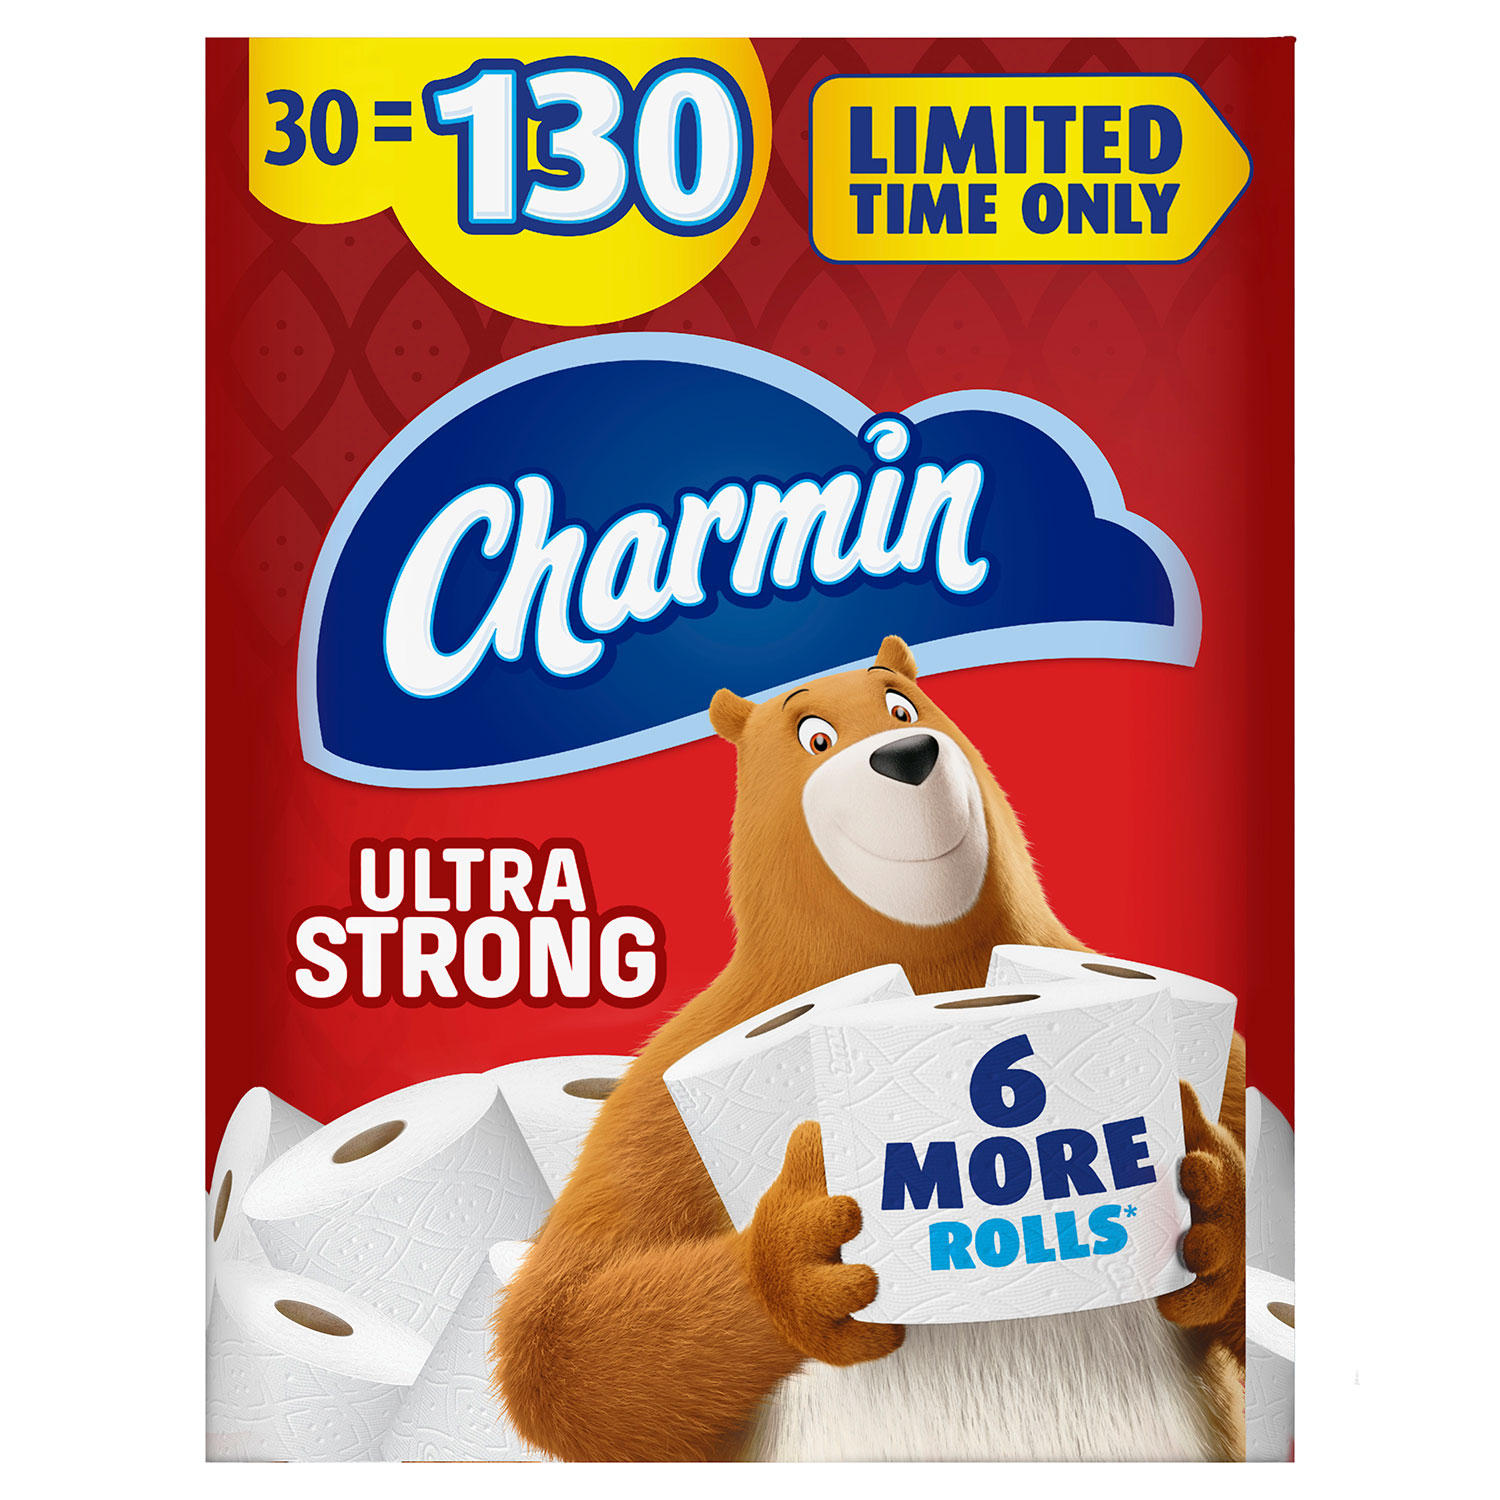 Charmin Ultra Strong Toilet Paper Bulk Mega Rolls - $10 off (good thru June 5) with Instant Savings when you buy 2 @ Sam's Club